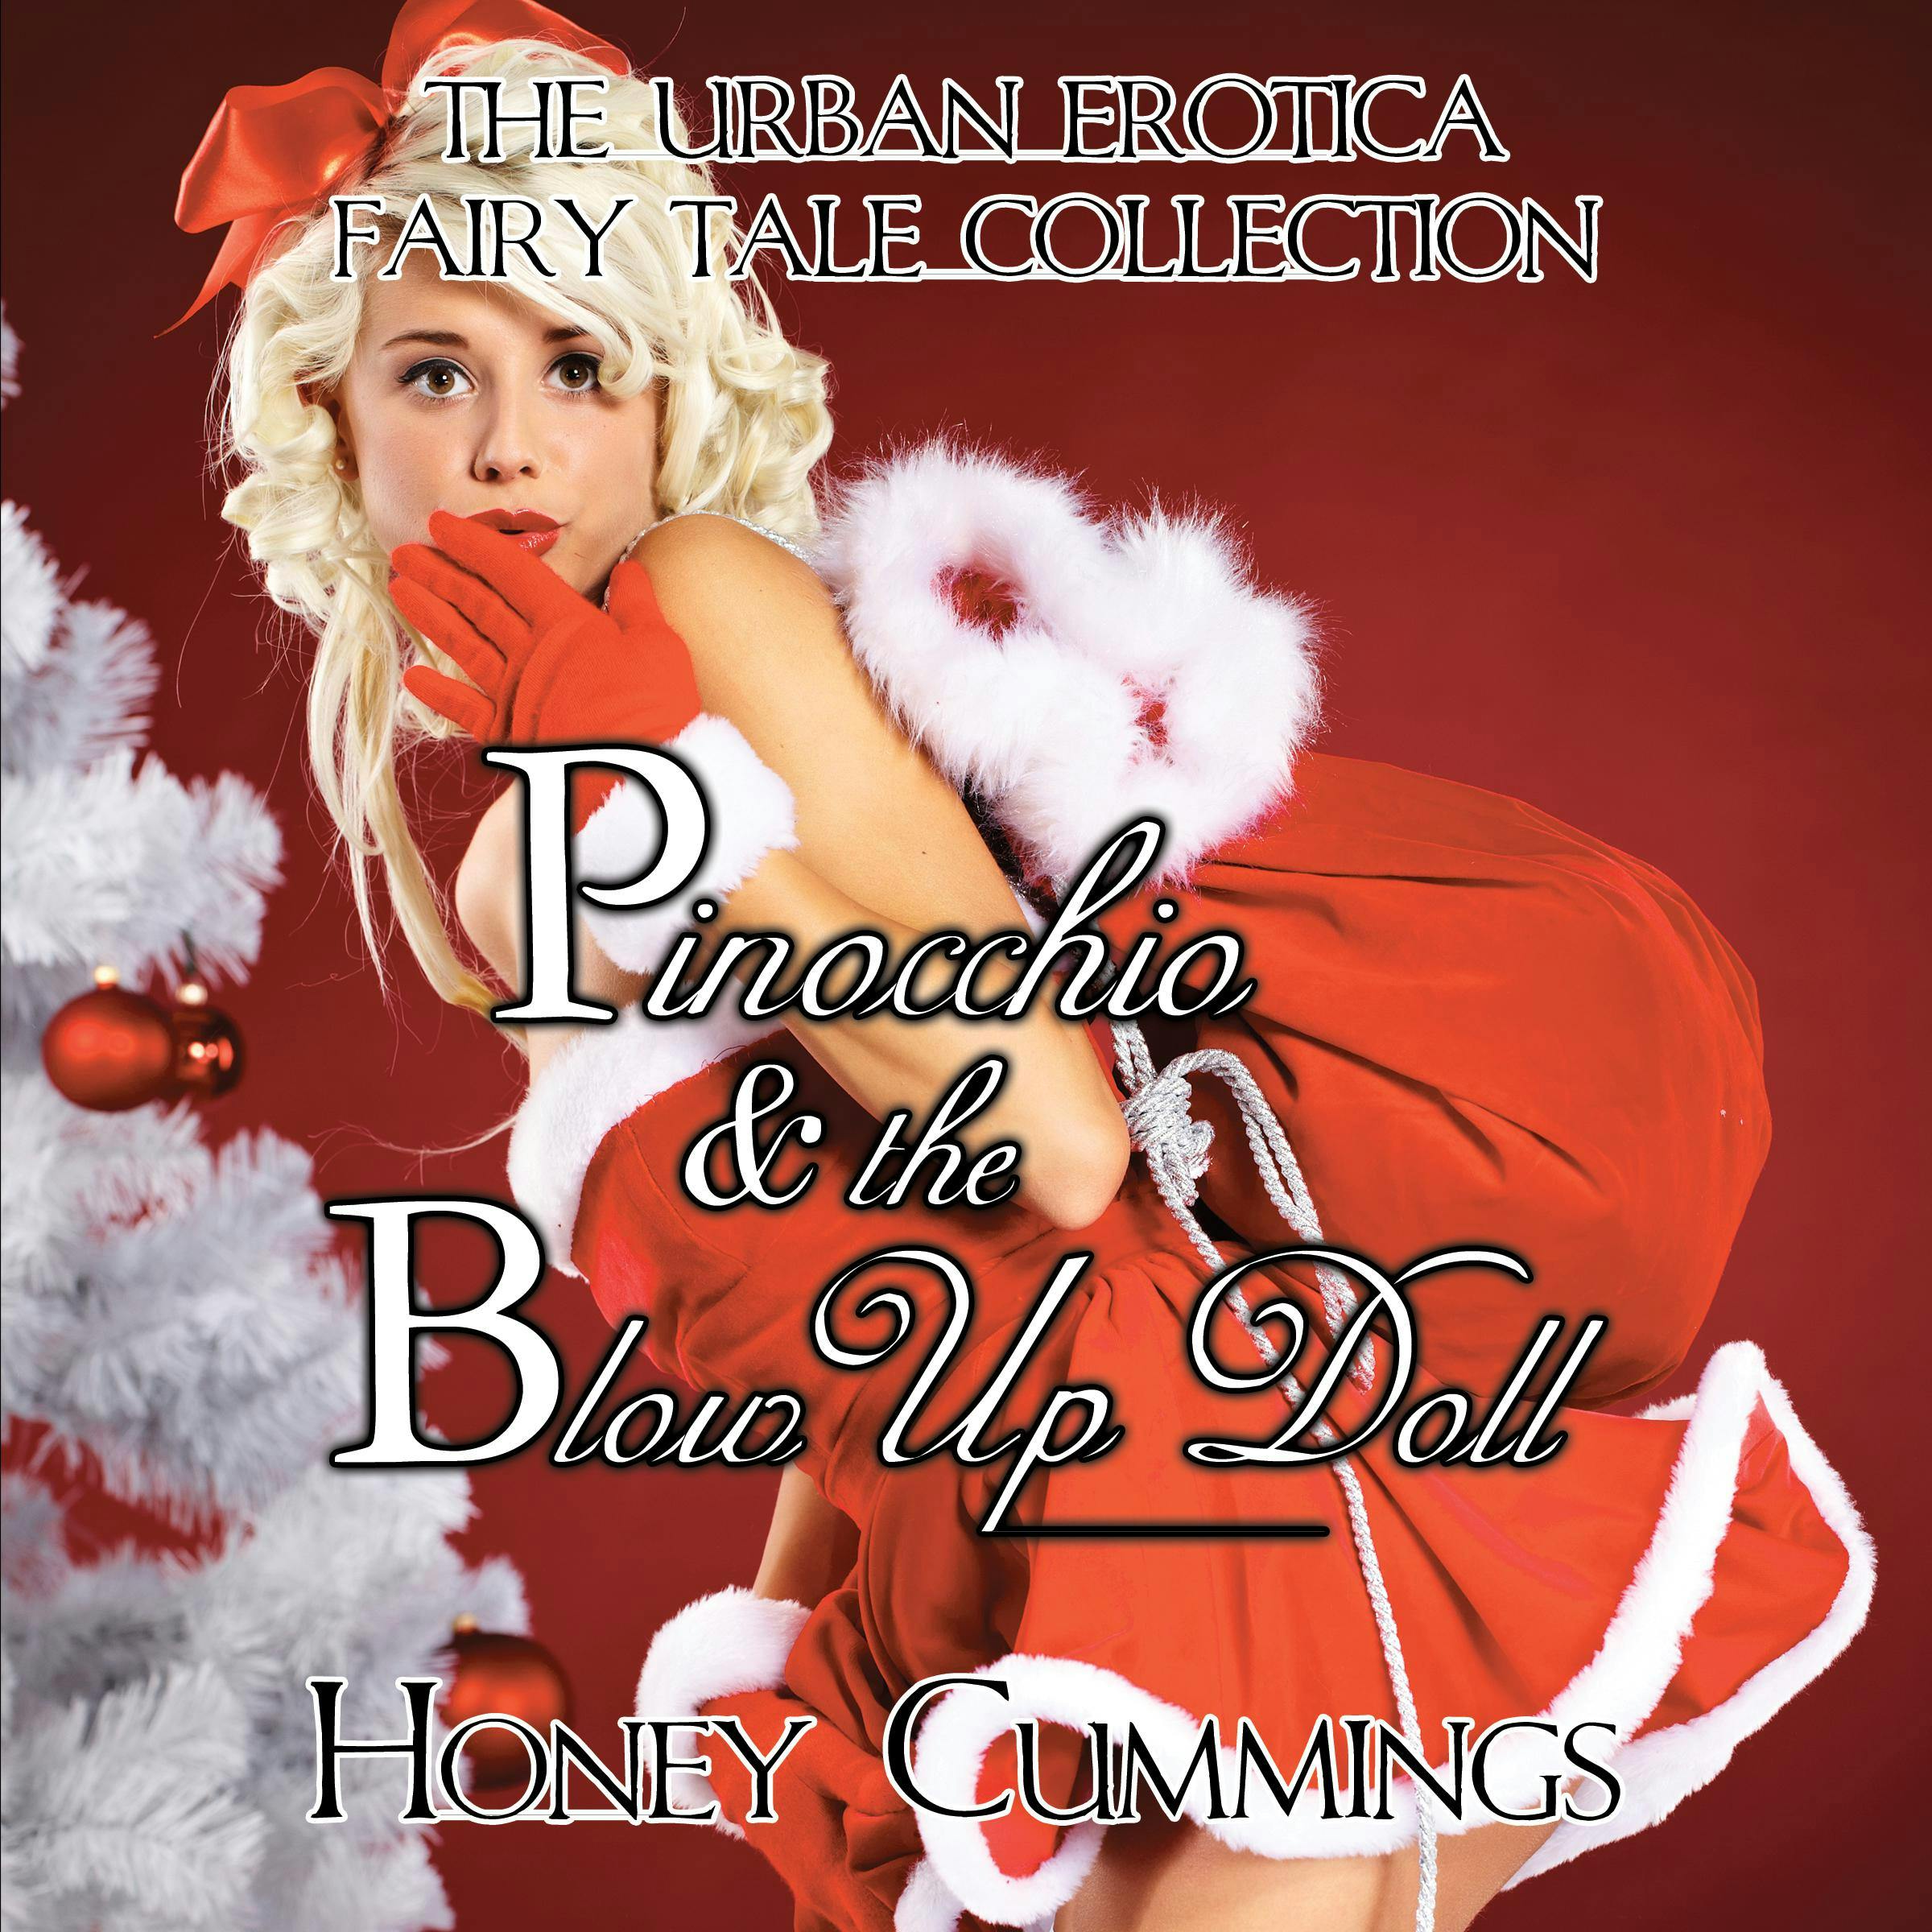 Pinocchio and the Blow Up Doll - Honey Cummings